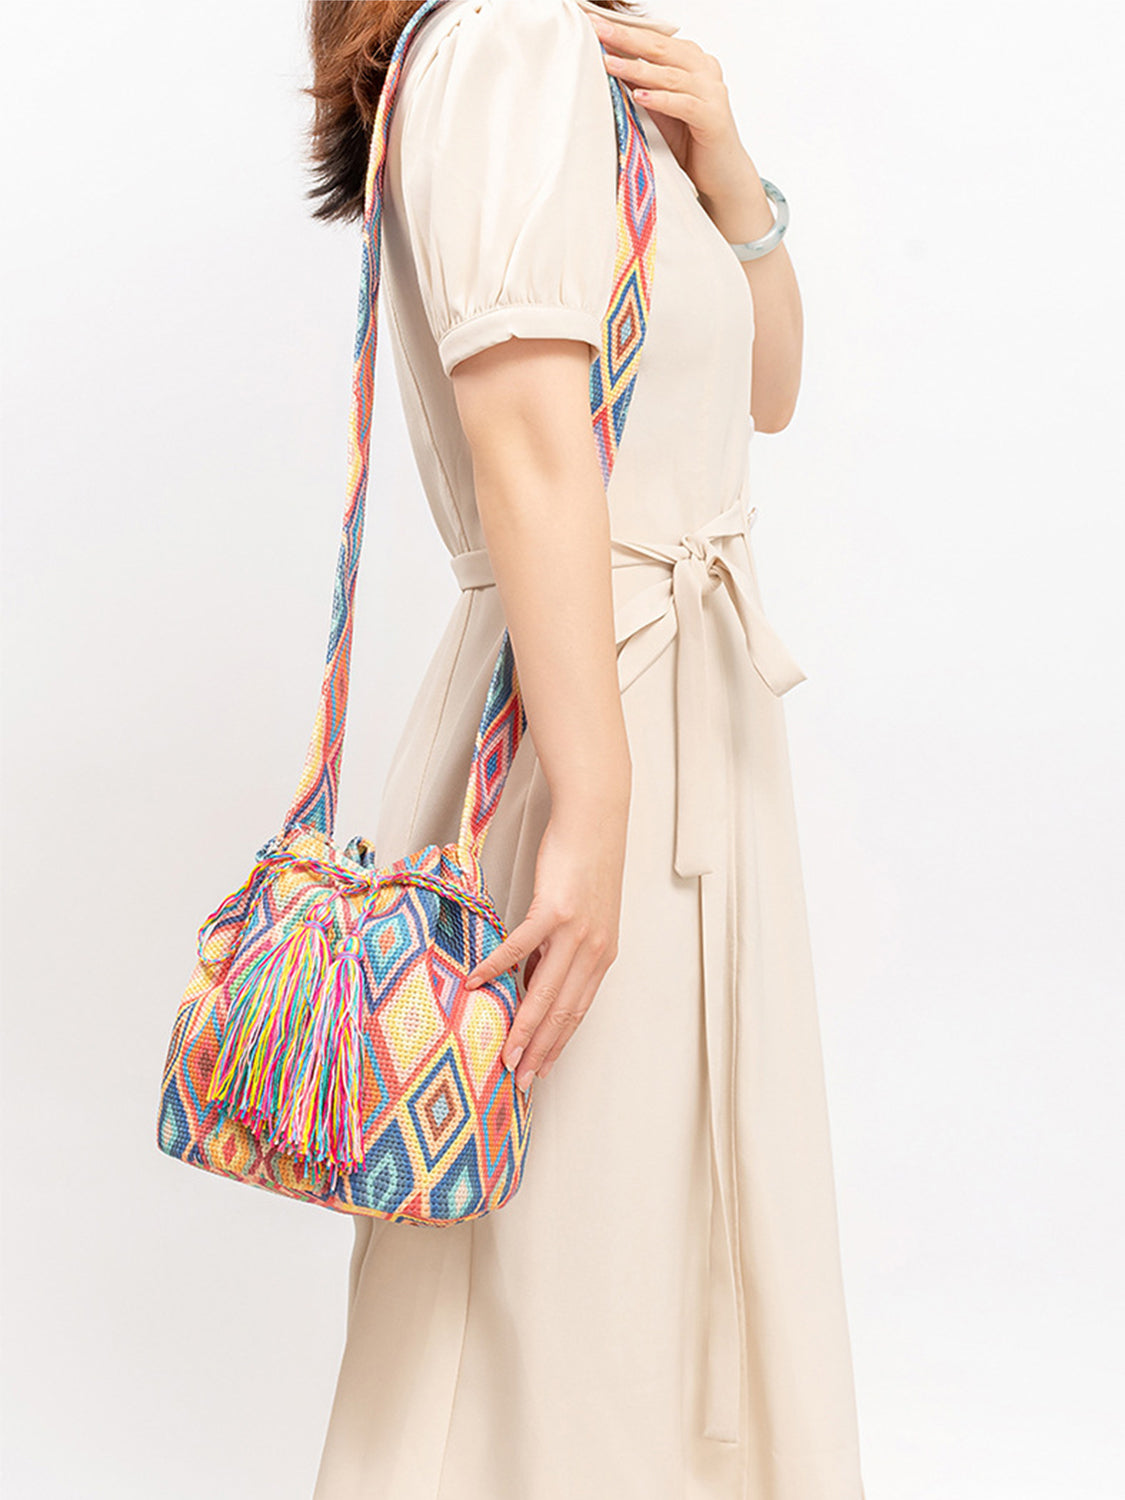 Woven fabric bucket bag with colorful geometric designs.